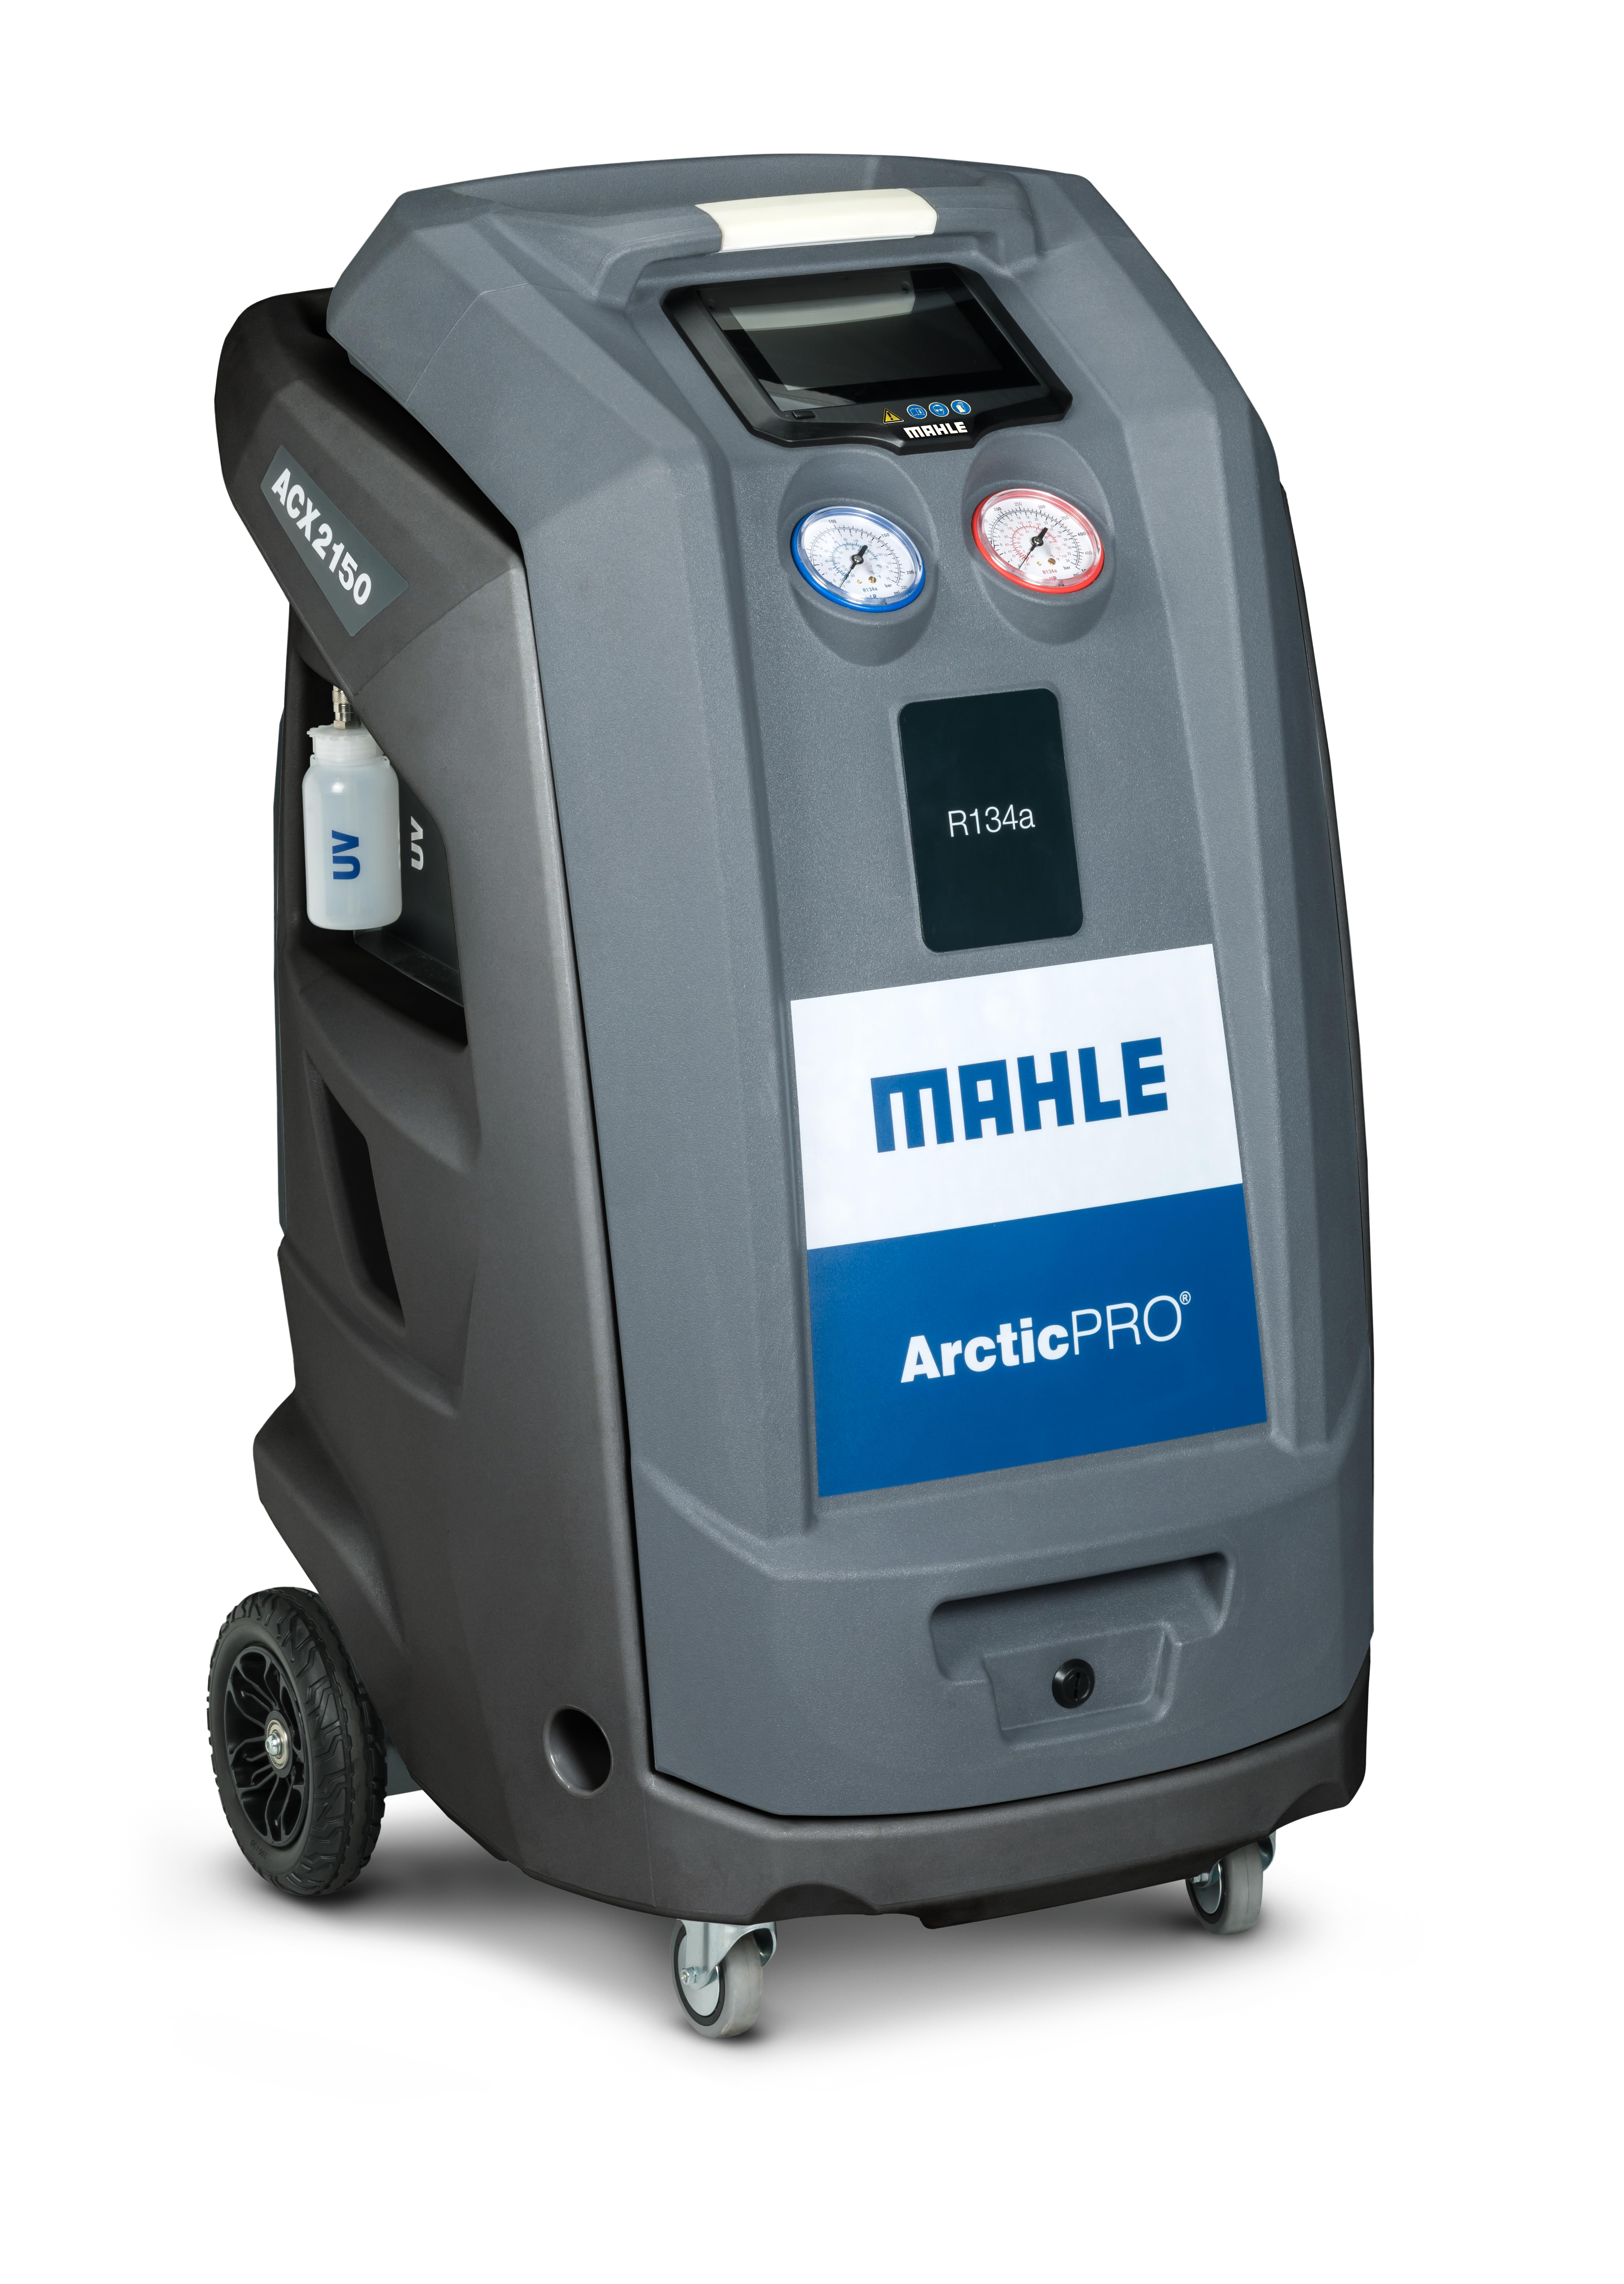 MAHLE SERVICE SOLUTION - ACX2150 - MID-RANGE R134A AIR CONDITIONING SERVICE SYSTEM -  460 80445 00